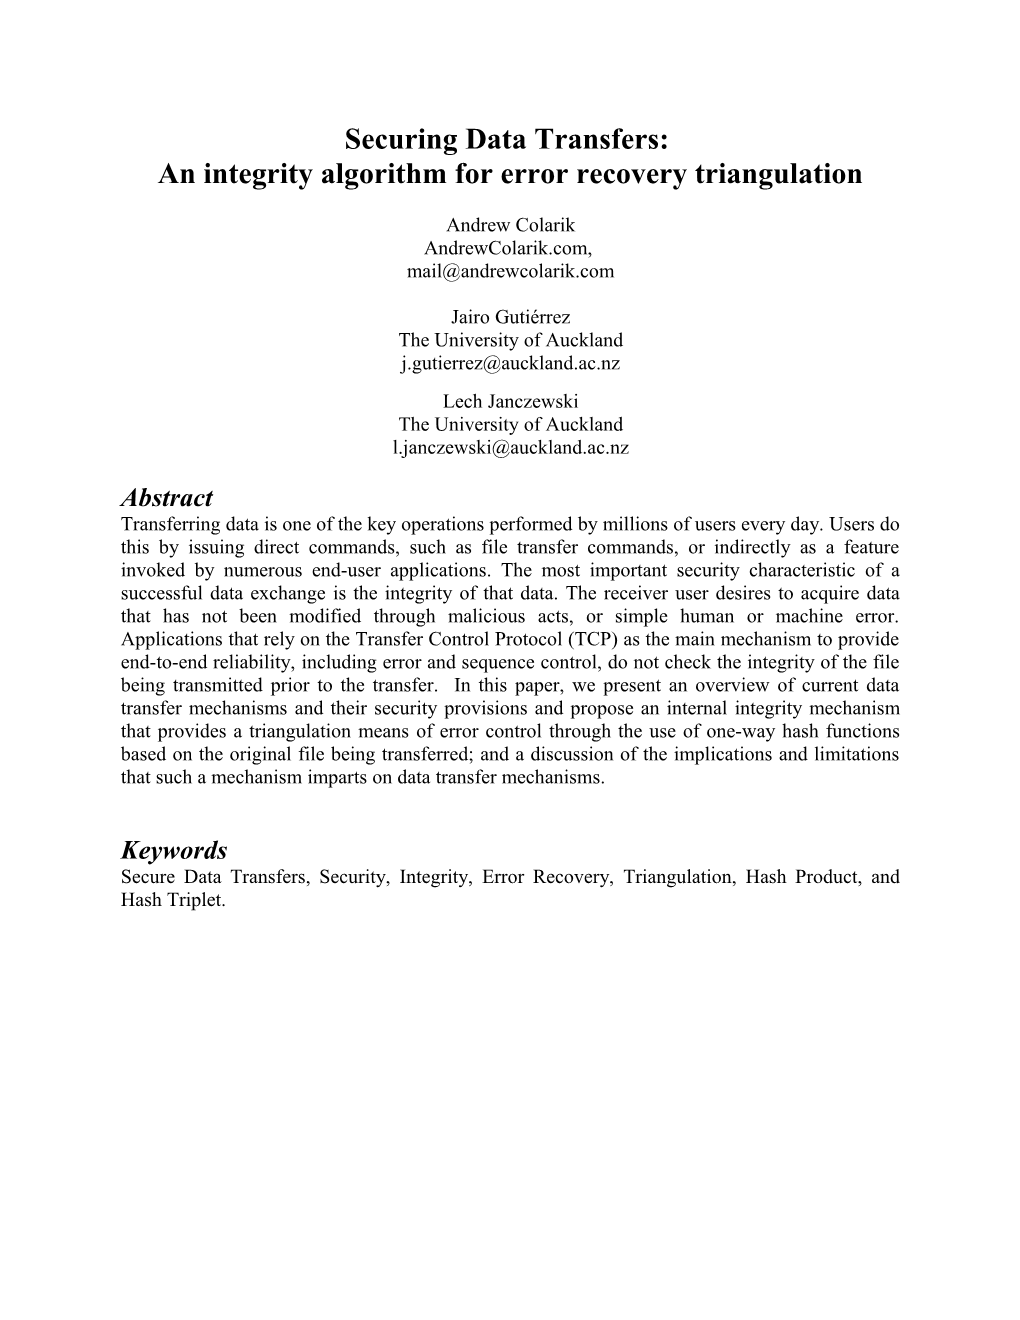 Secure FTP: an Integrity Algorithm for Error Recovery Triangulation